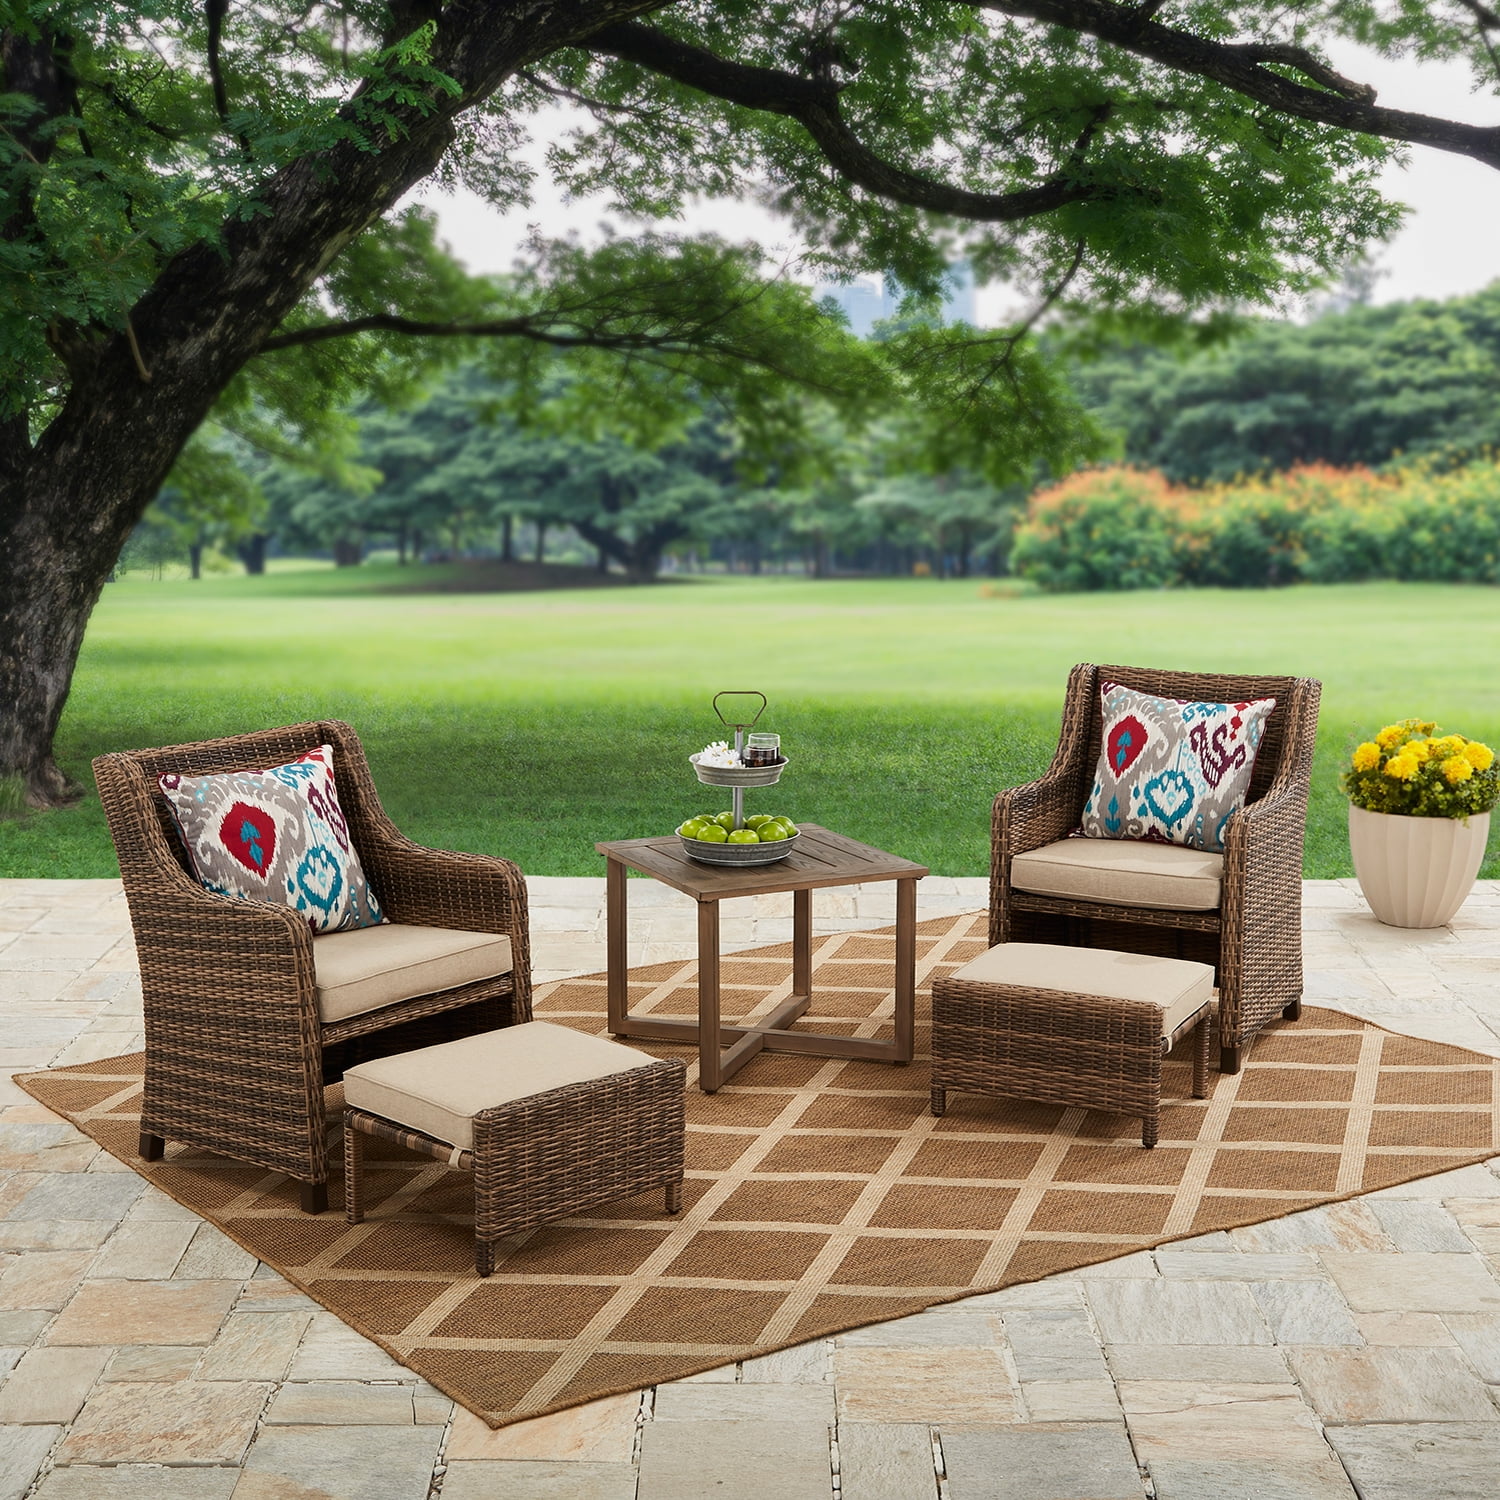 5-Piece Better Homes & Garden Hawthorne Park Outdoor Chat Set w/ Beige Cushions $297 + Free Shipping